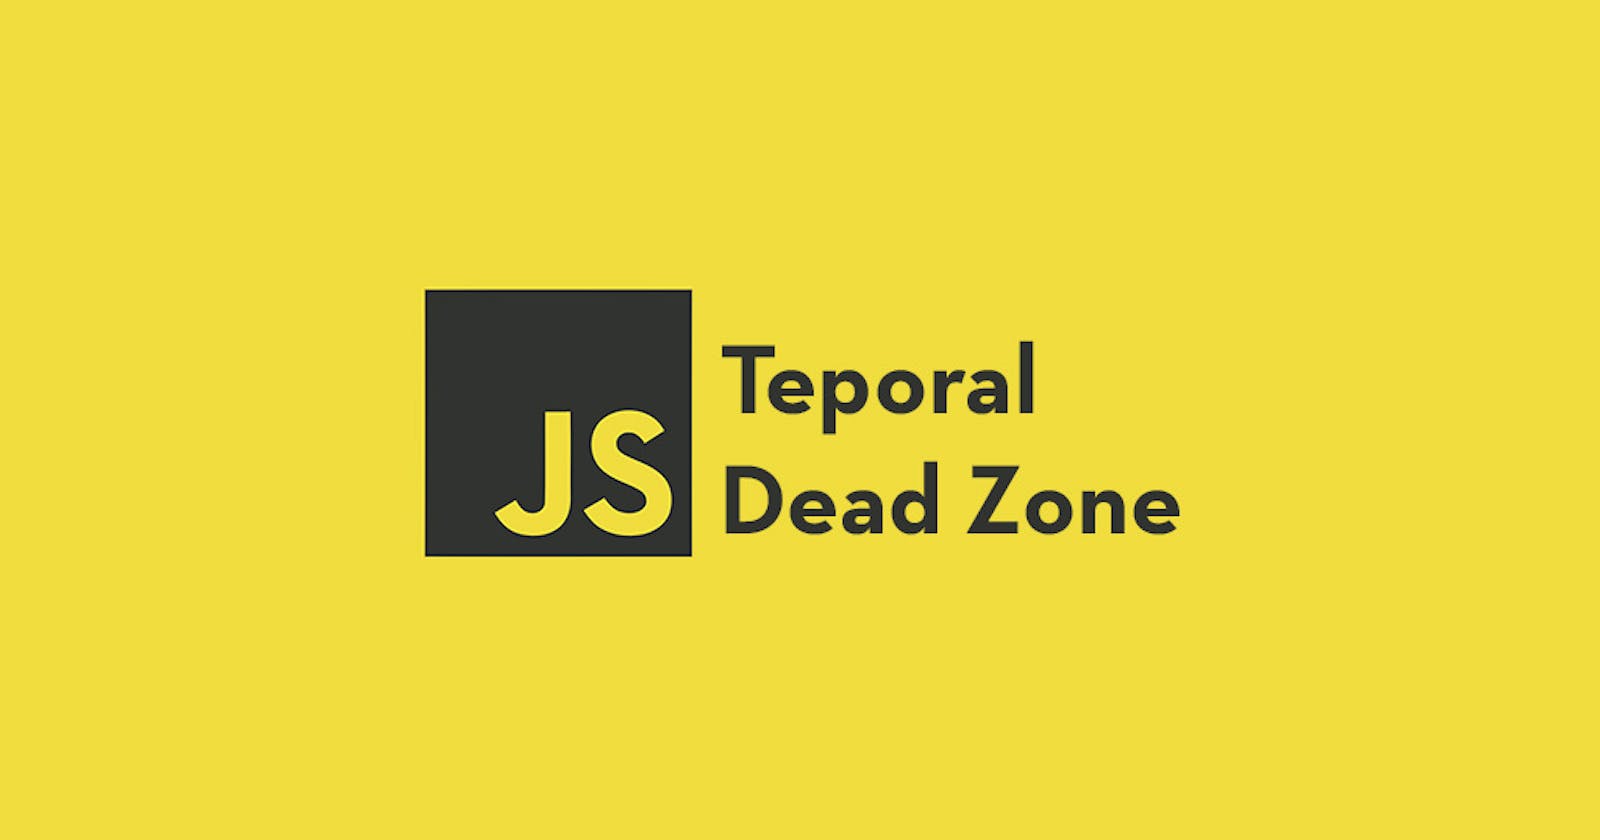 What is Temporal Dead Zone?